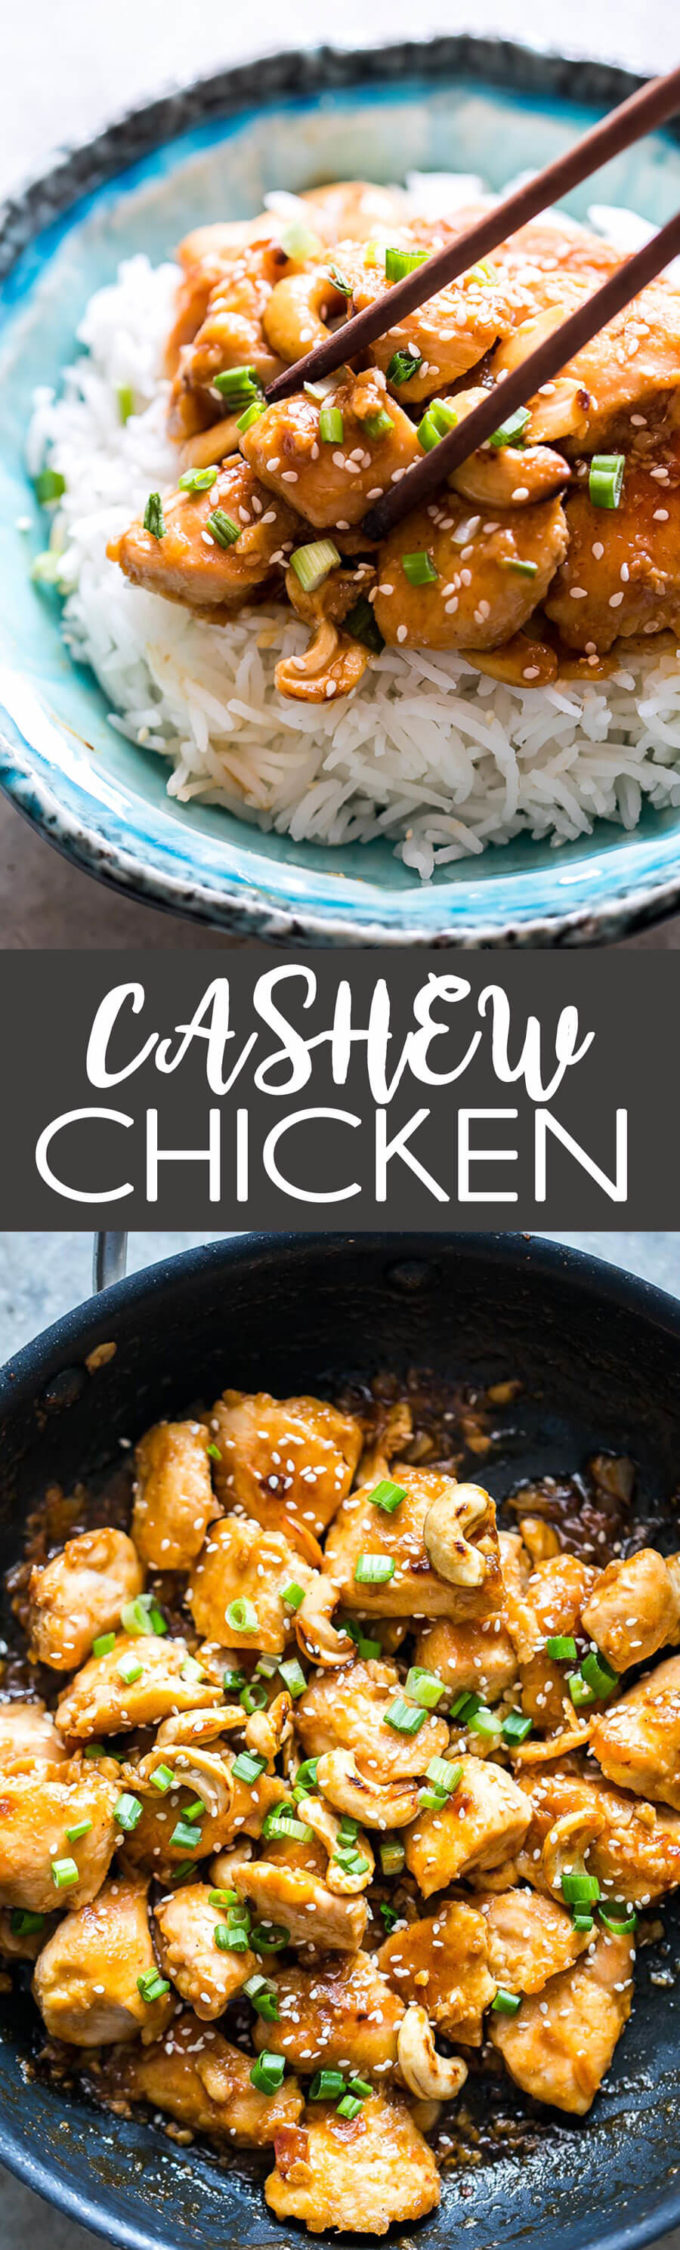 Cashew Chicken that is super simple and easy to make, and makes for a great chicken dinner